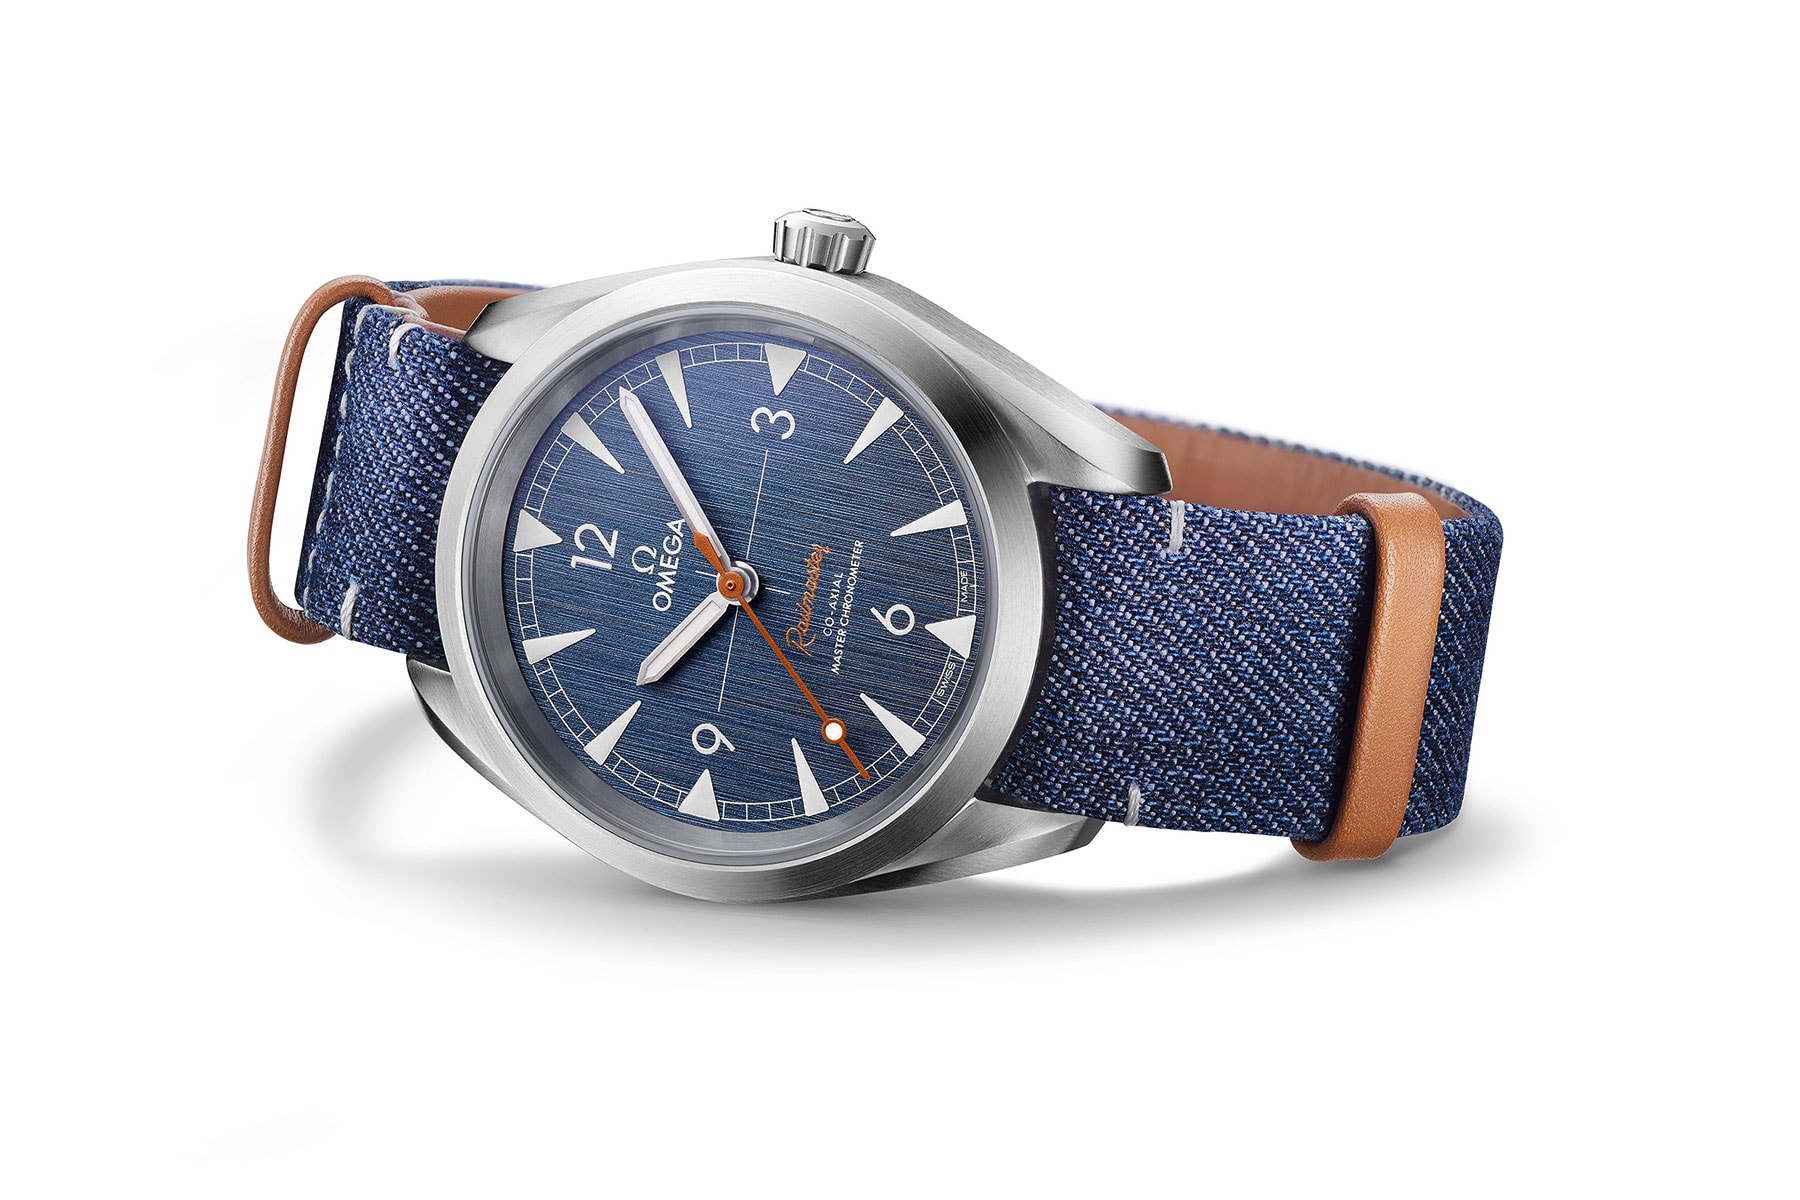 Omega seamaster railmaster denim faded jeans nato brown leather strap 220.12.40.20.03.001 OMEGA CO-AXIAL MASTER CHRONOMETER 40 MM 4900 usd steel